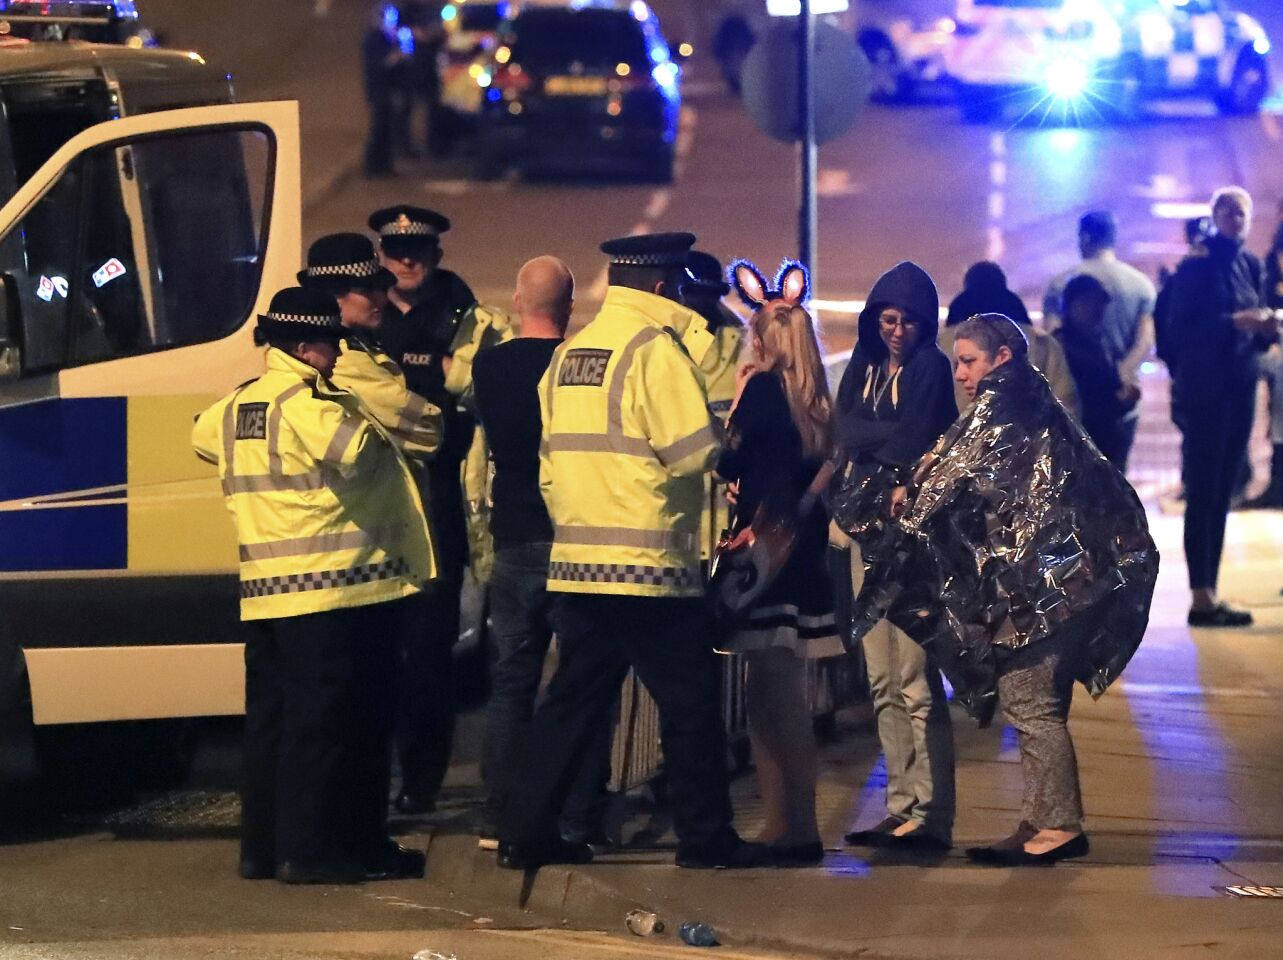 Emergency services personnel speak to people outside Manchester Arena after reports of an explosion at the venue Monday night.